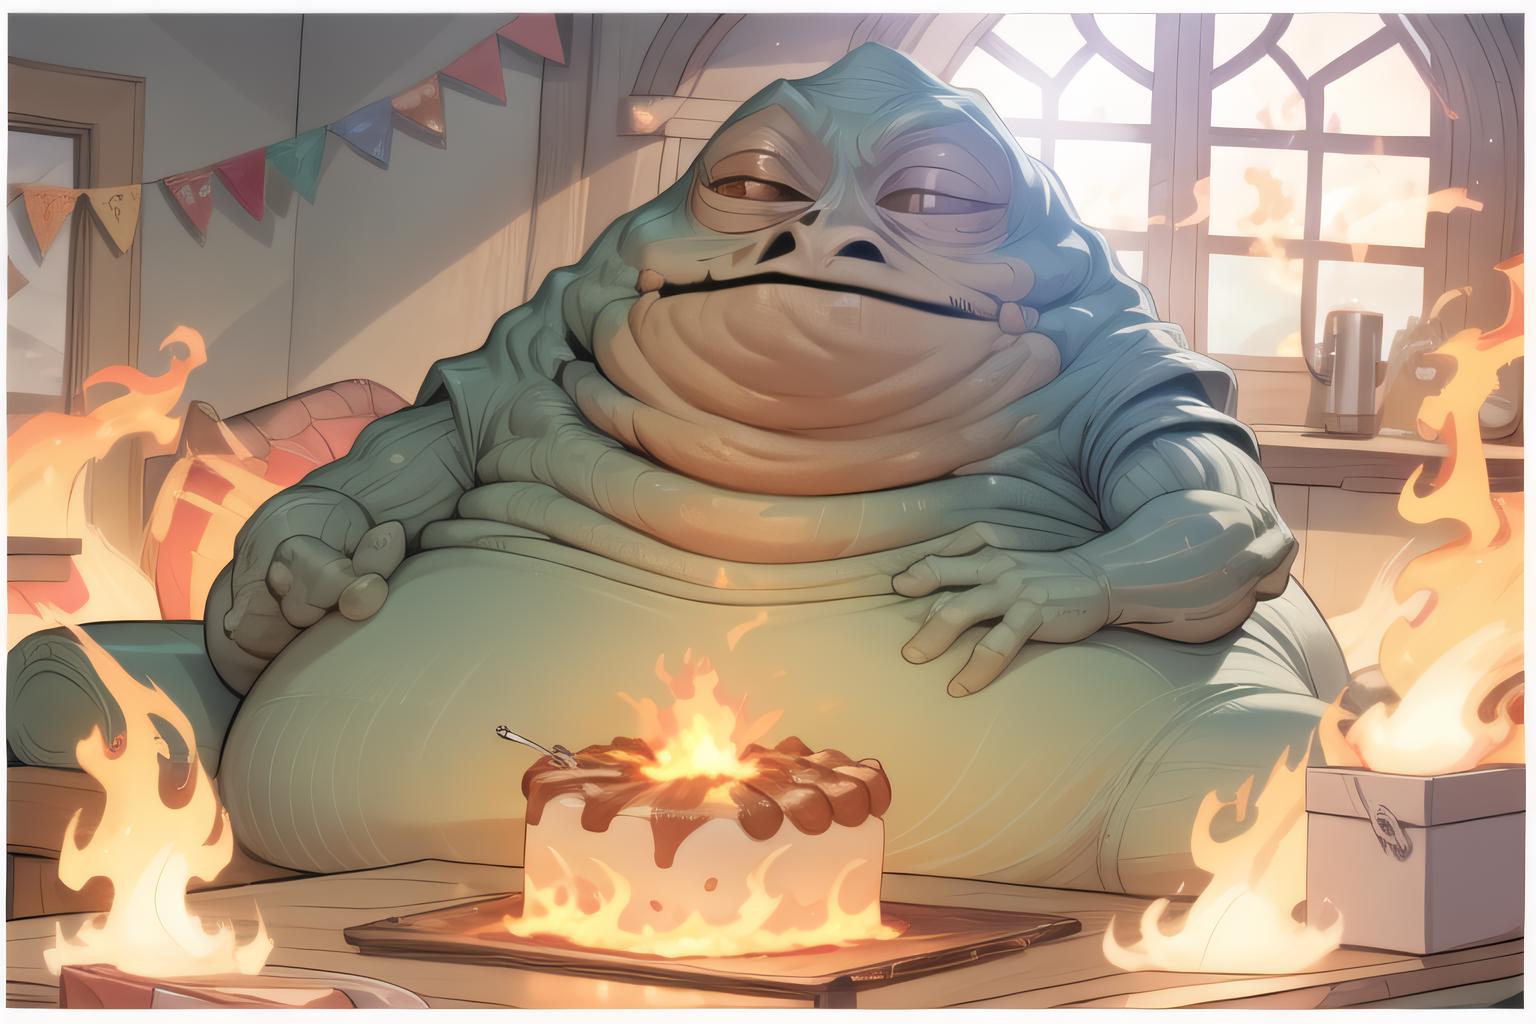 A cartoon drawing of a large, slimy monster sitting in front of a cake. The monster has a big belly and is looking at the cake, possibly contemplating eating it. The scene is set in a room with a dining table and a couch in the background.